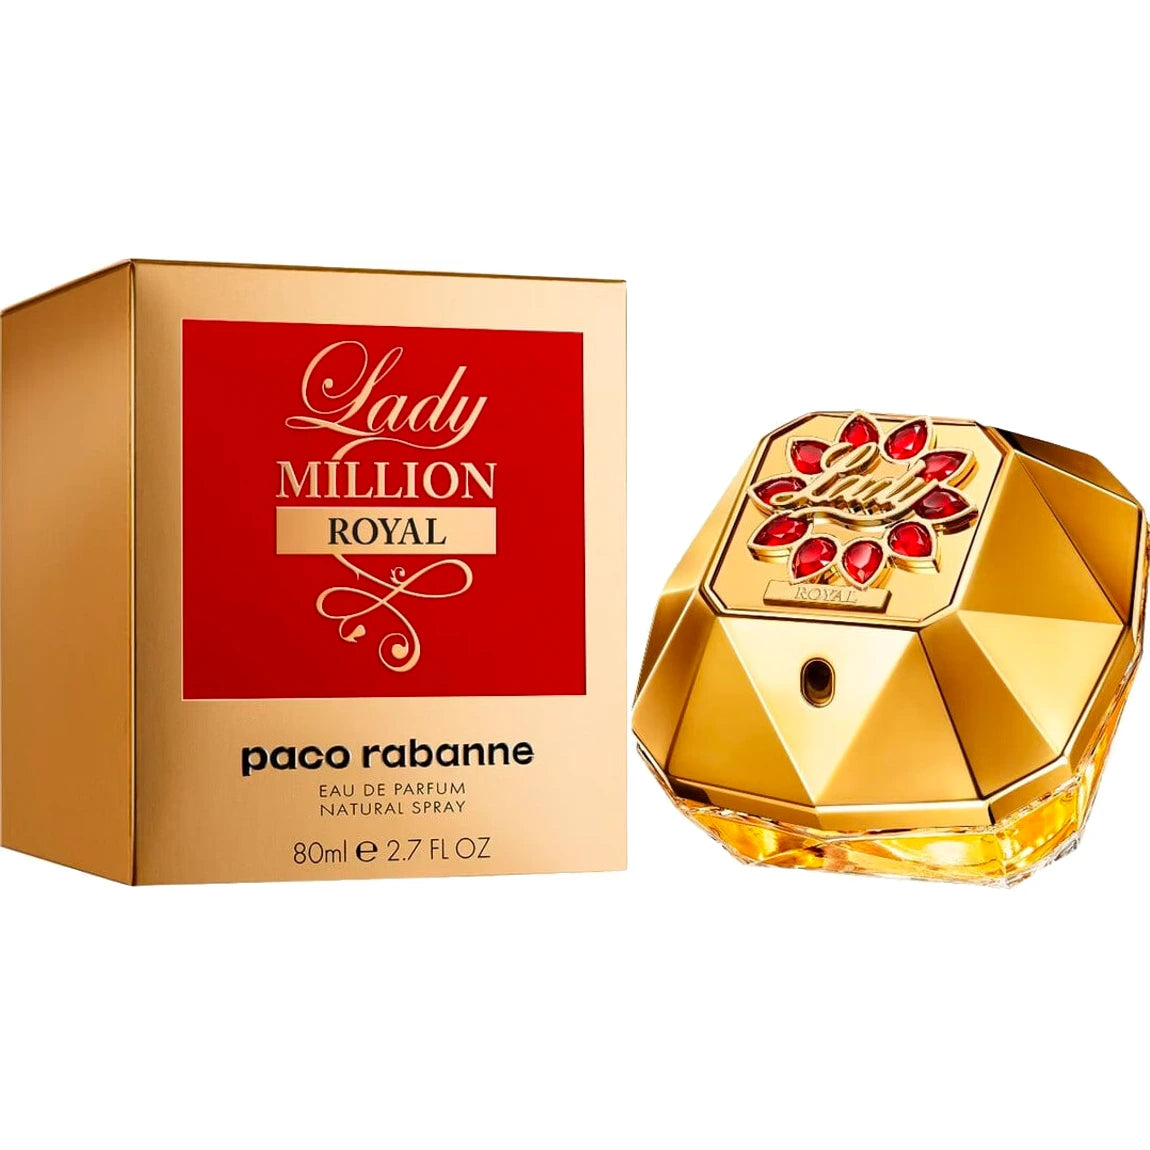 <p data-mce-fragment="1">The Lady Million Royal for women by Paco Rabanne is a defiantly feminine fragrance with a bold expression of glamourous sensuality. A juicy pomegranate and raspberry accord is artfully blended with delicate notes of gardenia and a creamy sandalwood for an alluring scent that has a twist of irreverent fun. The beautiful diamond-shaped bottle is decorated in a captivating red floral design, alluring and enchanting.<br><meta charset="utf-8"></p>
<p><strong>Fragrance Family:<span> </span></strong><span>Florals<br></span><strong>Scent Type:<span> </span></strong><span>Fruity Florals<br></span><strong>Key Notes:<span> </span></strong><span>Juicy Pomegranate, Floral Bouquet, Sensual Cashmeran</span></p>